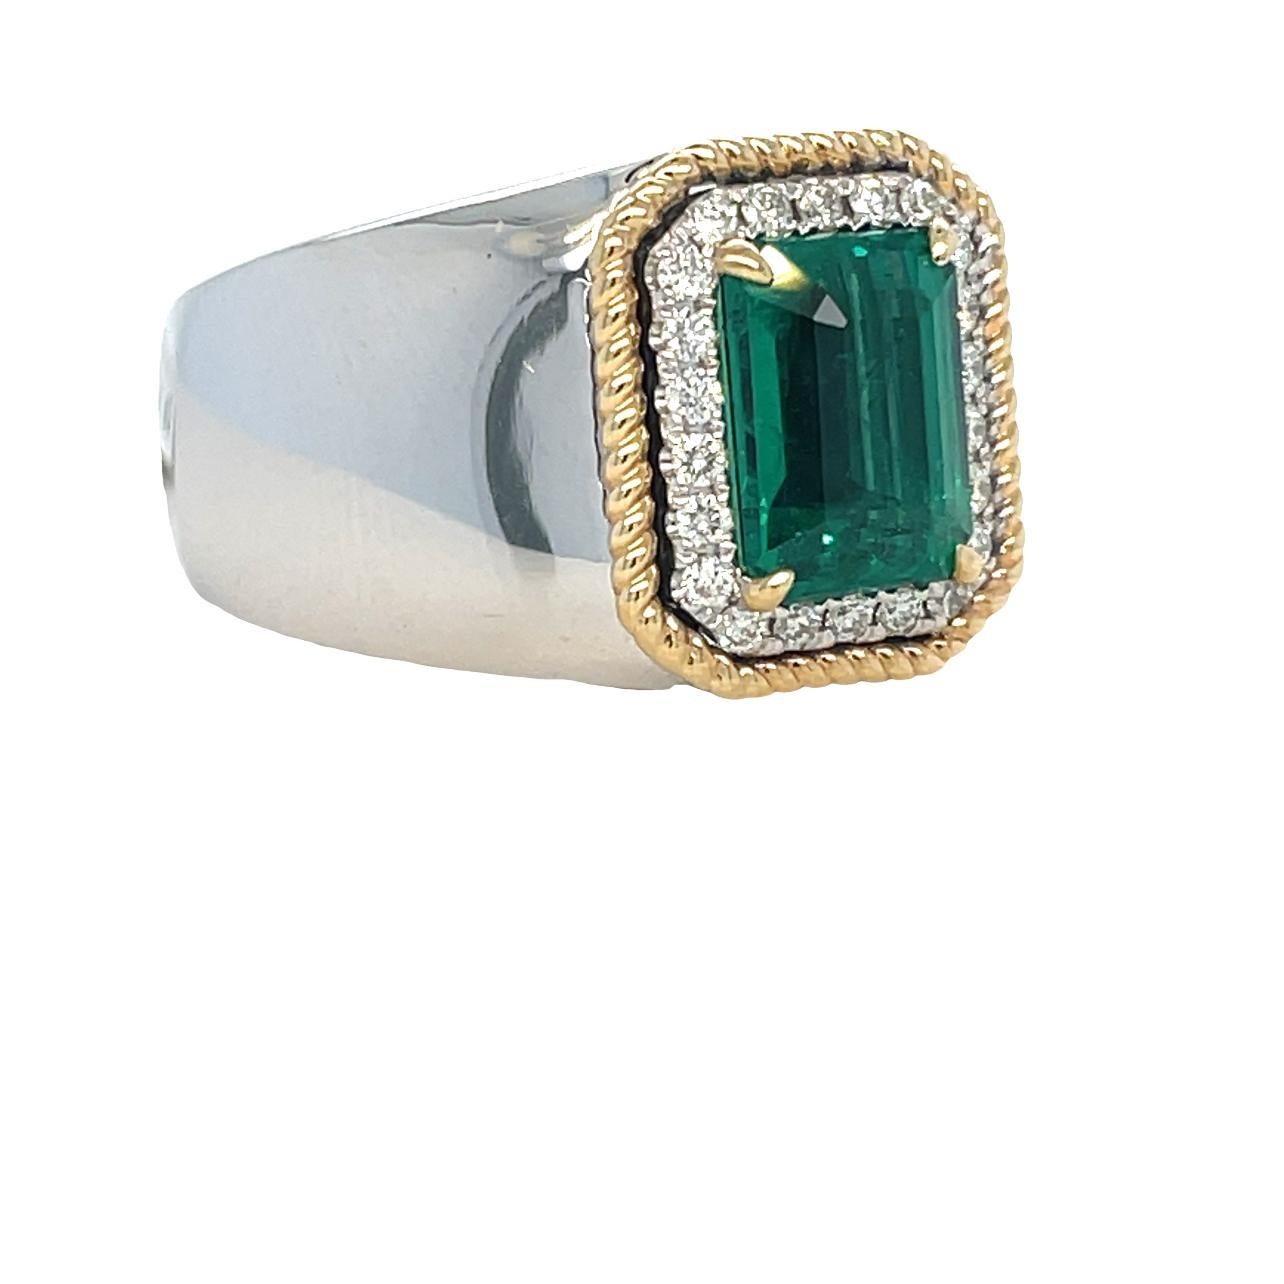 This unique Two Tone Men's ring has a vibrant green 10x7 Emerald cut Zambian Emerald center surrounded by 22 brilliant cut round sparkling diamonds. The ring is set in 14K white and yellow gold. It comes in a beautiful box ready for the perfect